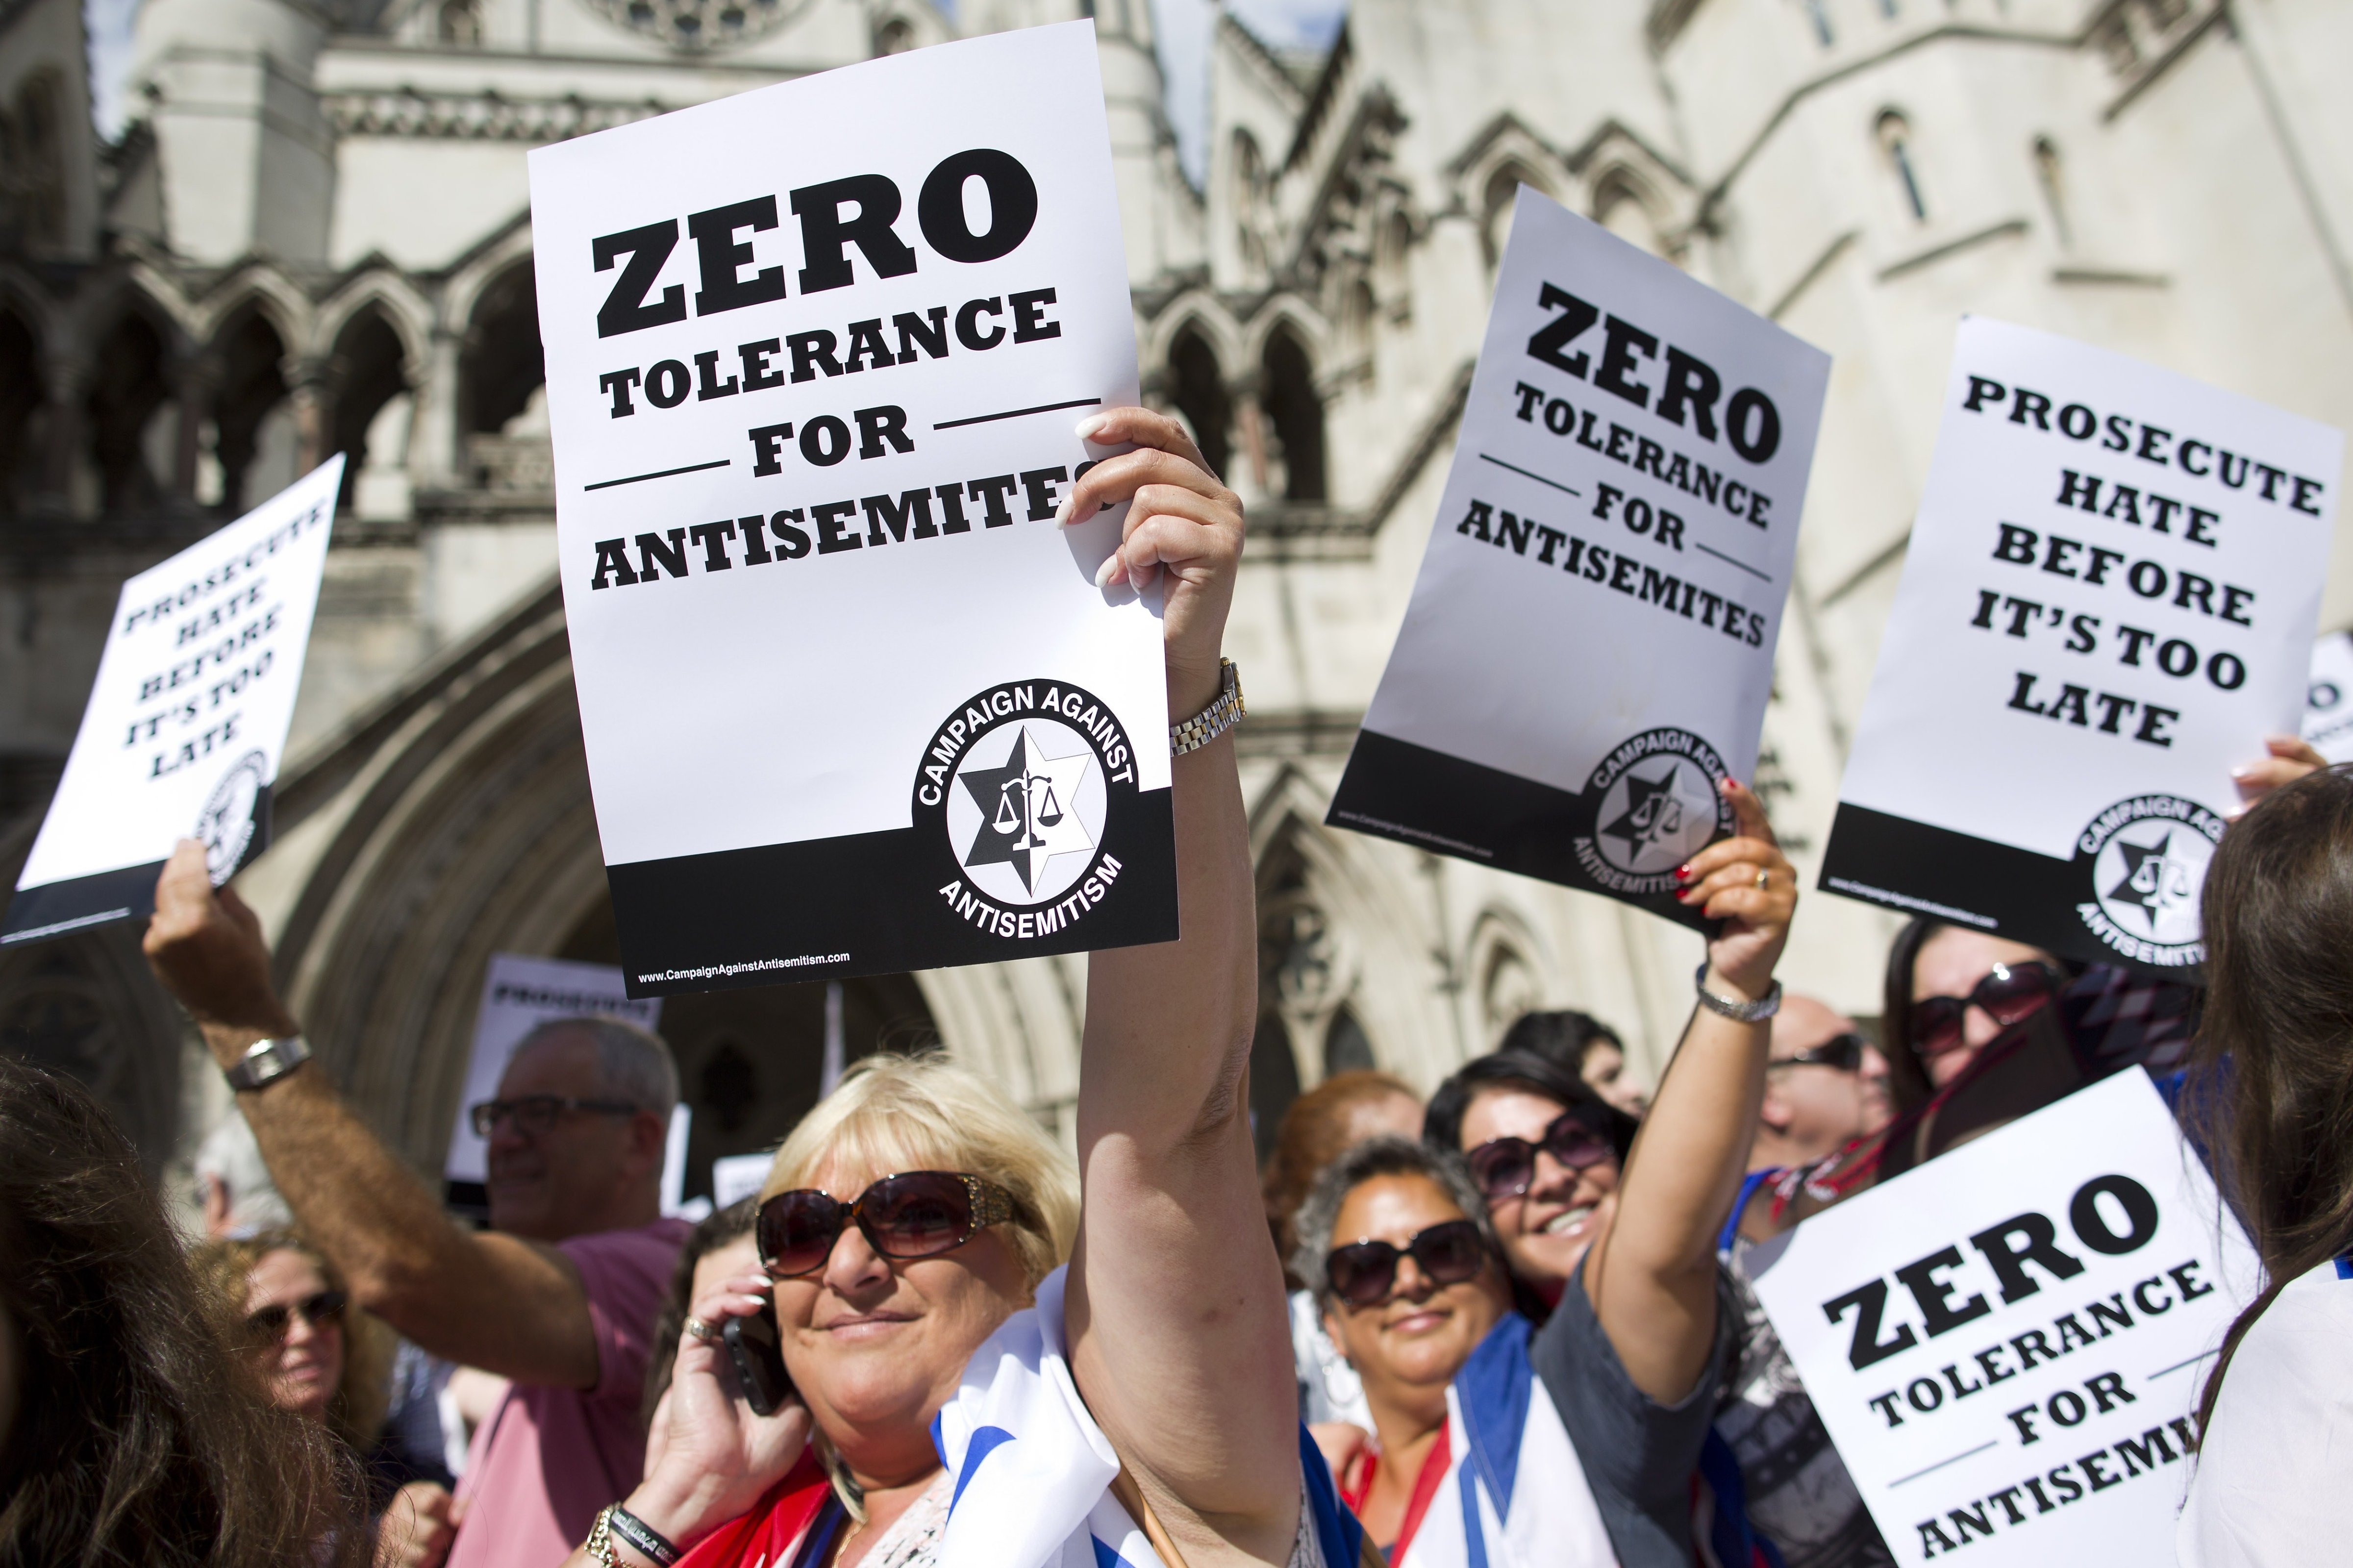 Jewish groups protest outside the Royal Courts of Justice in London on August 31, 2014, as they call for "Zero Tolerance for Anti-Semitism". Jewish groups demonstrated outside the British High Court as latest figures published by the Community Security Trust reported a spike in anti-semitic attacks on people and property in the UK following the lastest outbreak of violence between Israel and Palestinians in Gaza. (Justin Tallis—AFP/Getty Images)